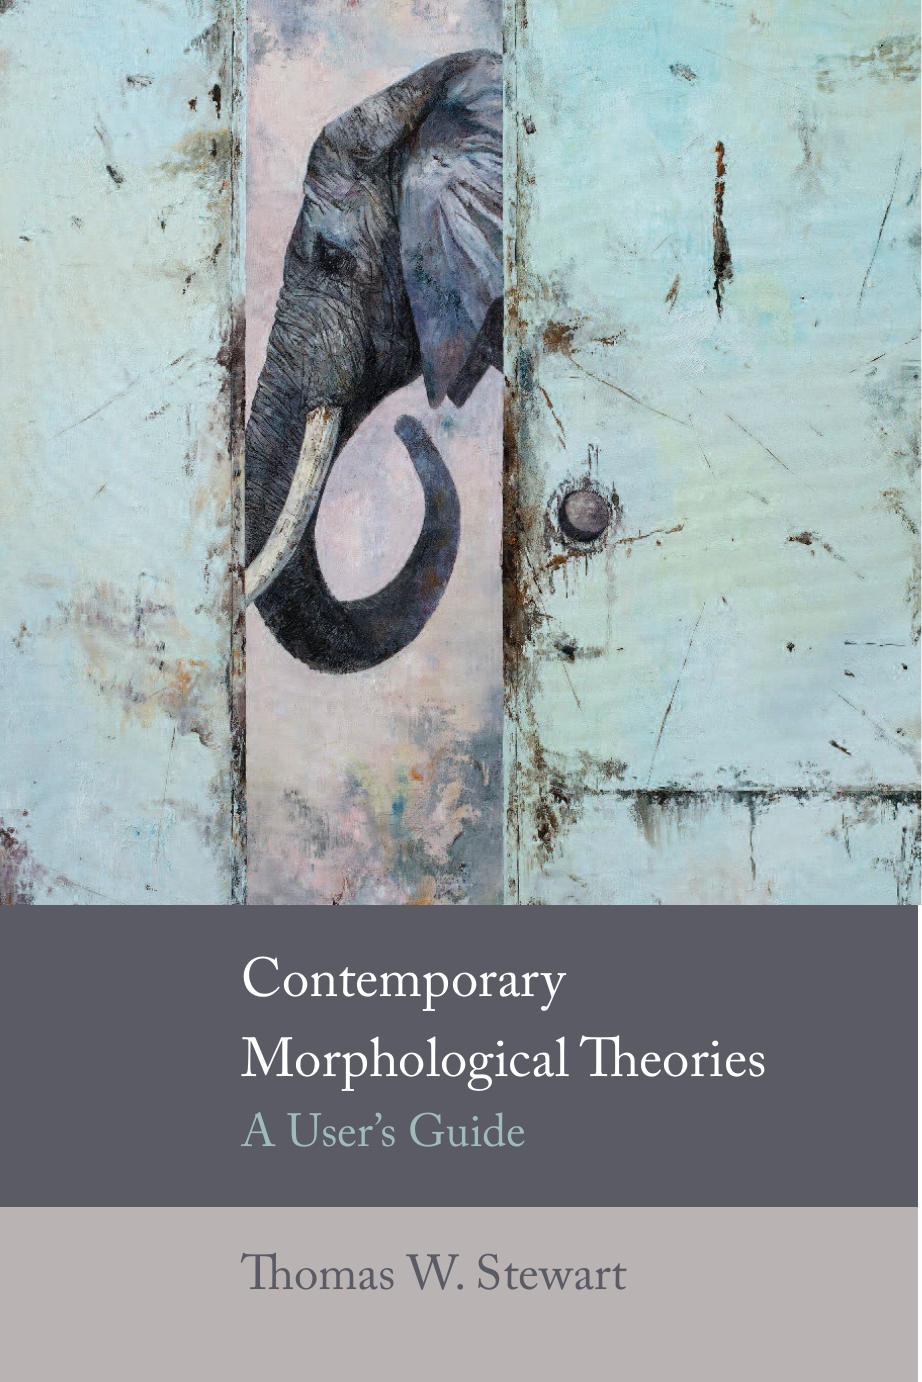 Contemporary Morphological Theories: A User's Guide